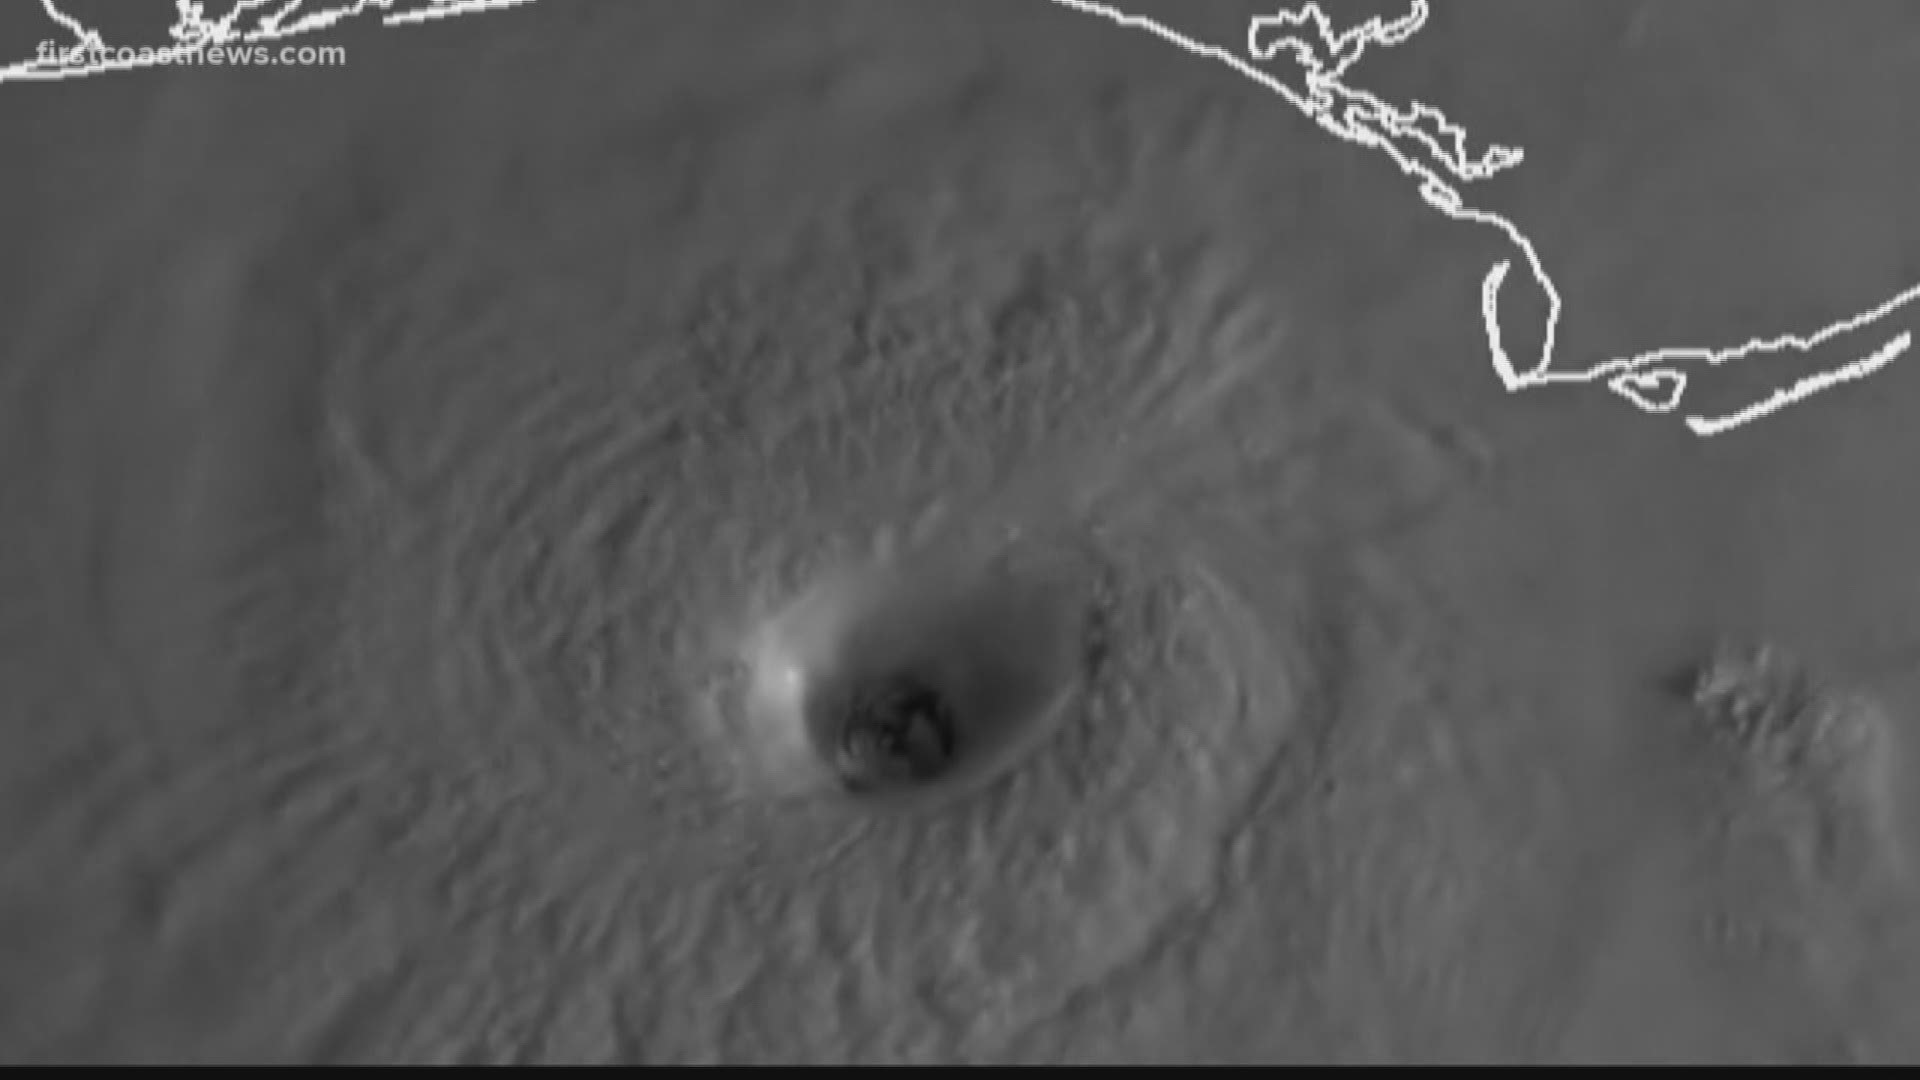 First Coast News meteorologists look back on the year's intense, nerve-wracking hurricane season.